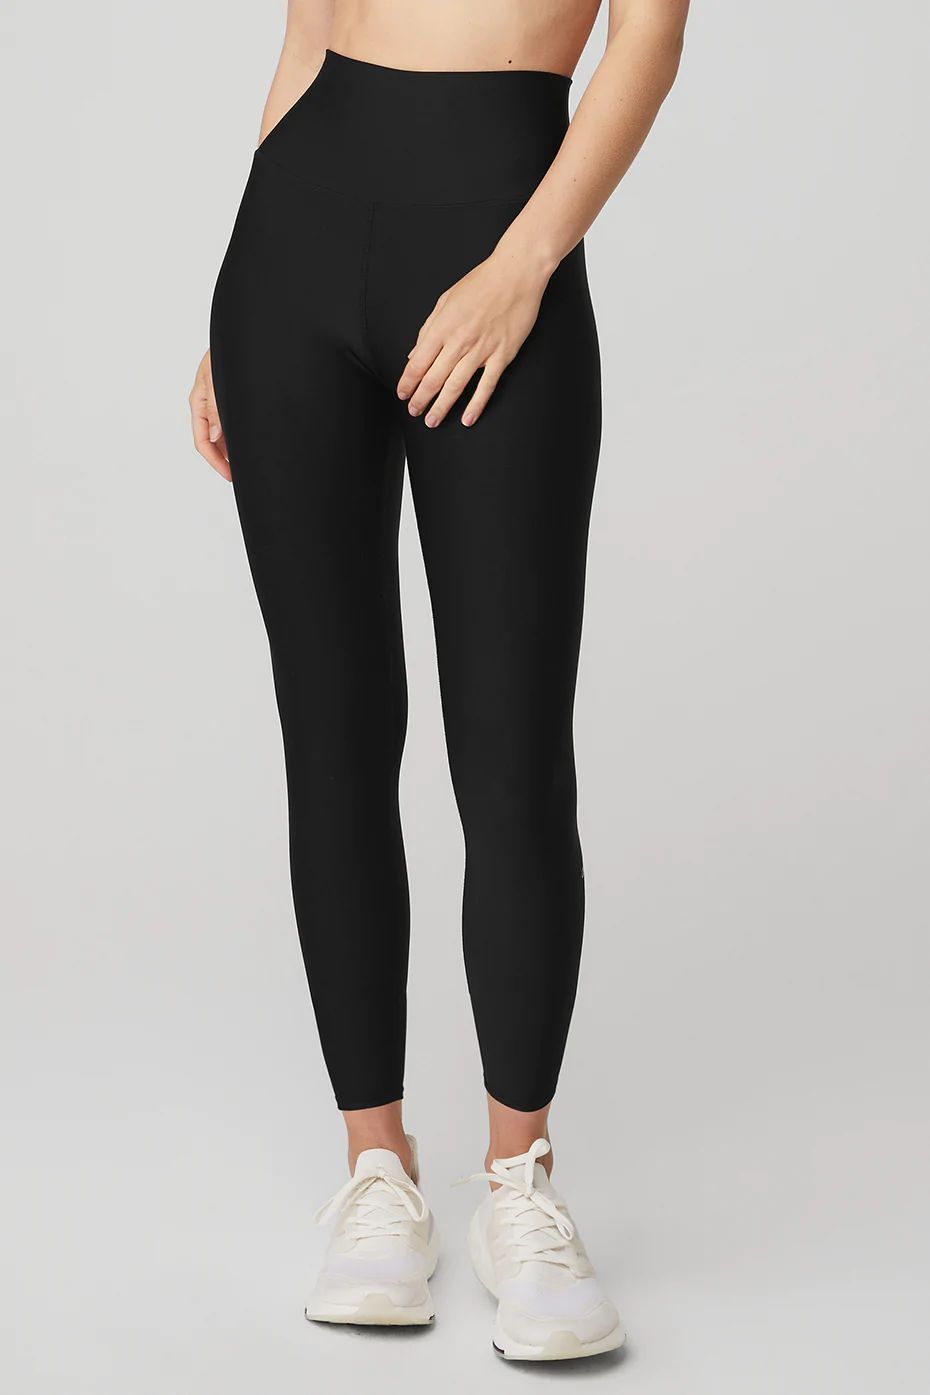 Alo YogaÂ® | 7/8 High-Waist Airlift Legging in Black, Size: Small | Alo Yoga